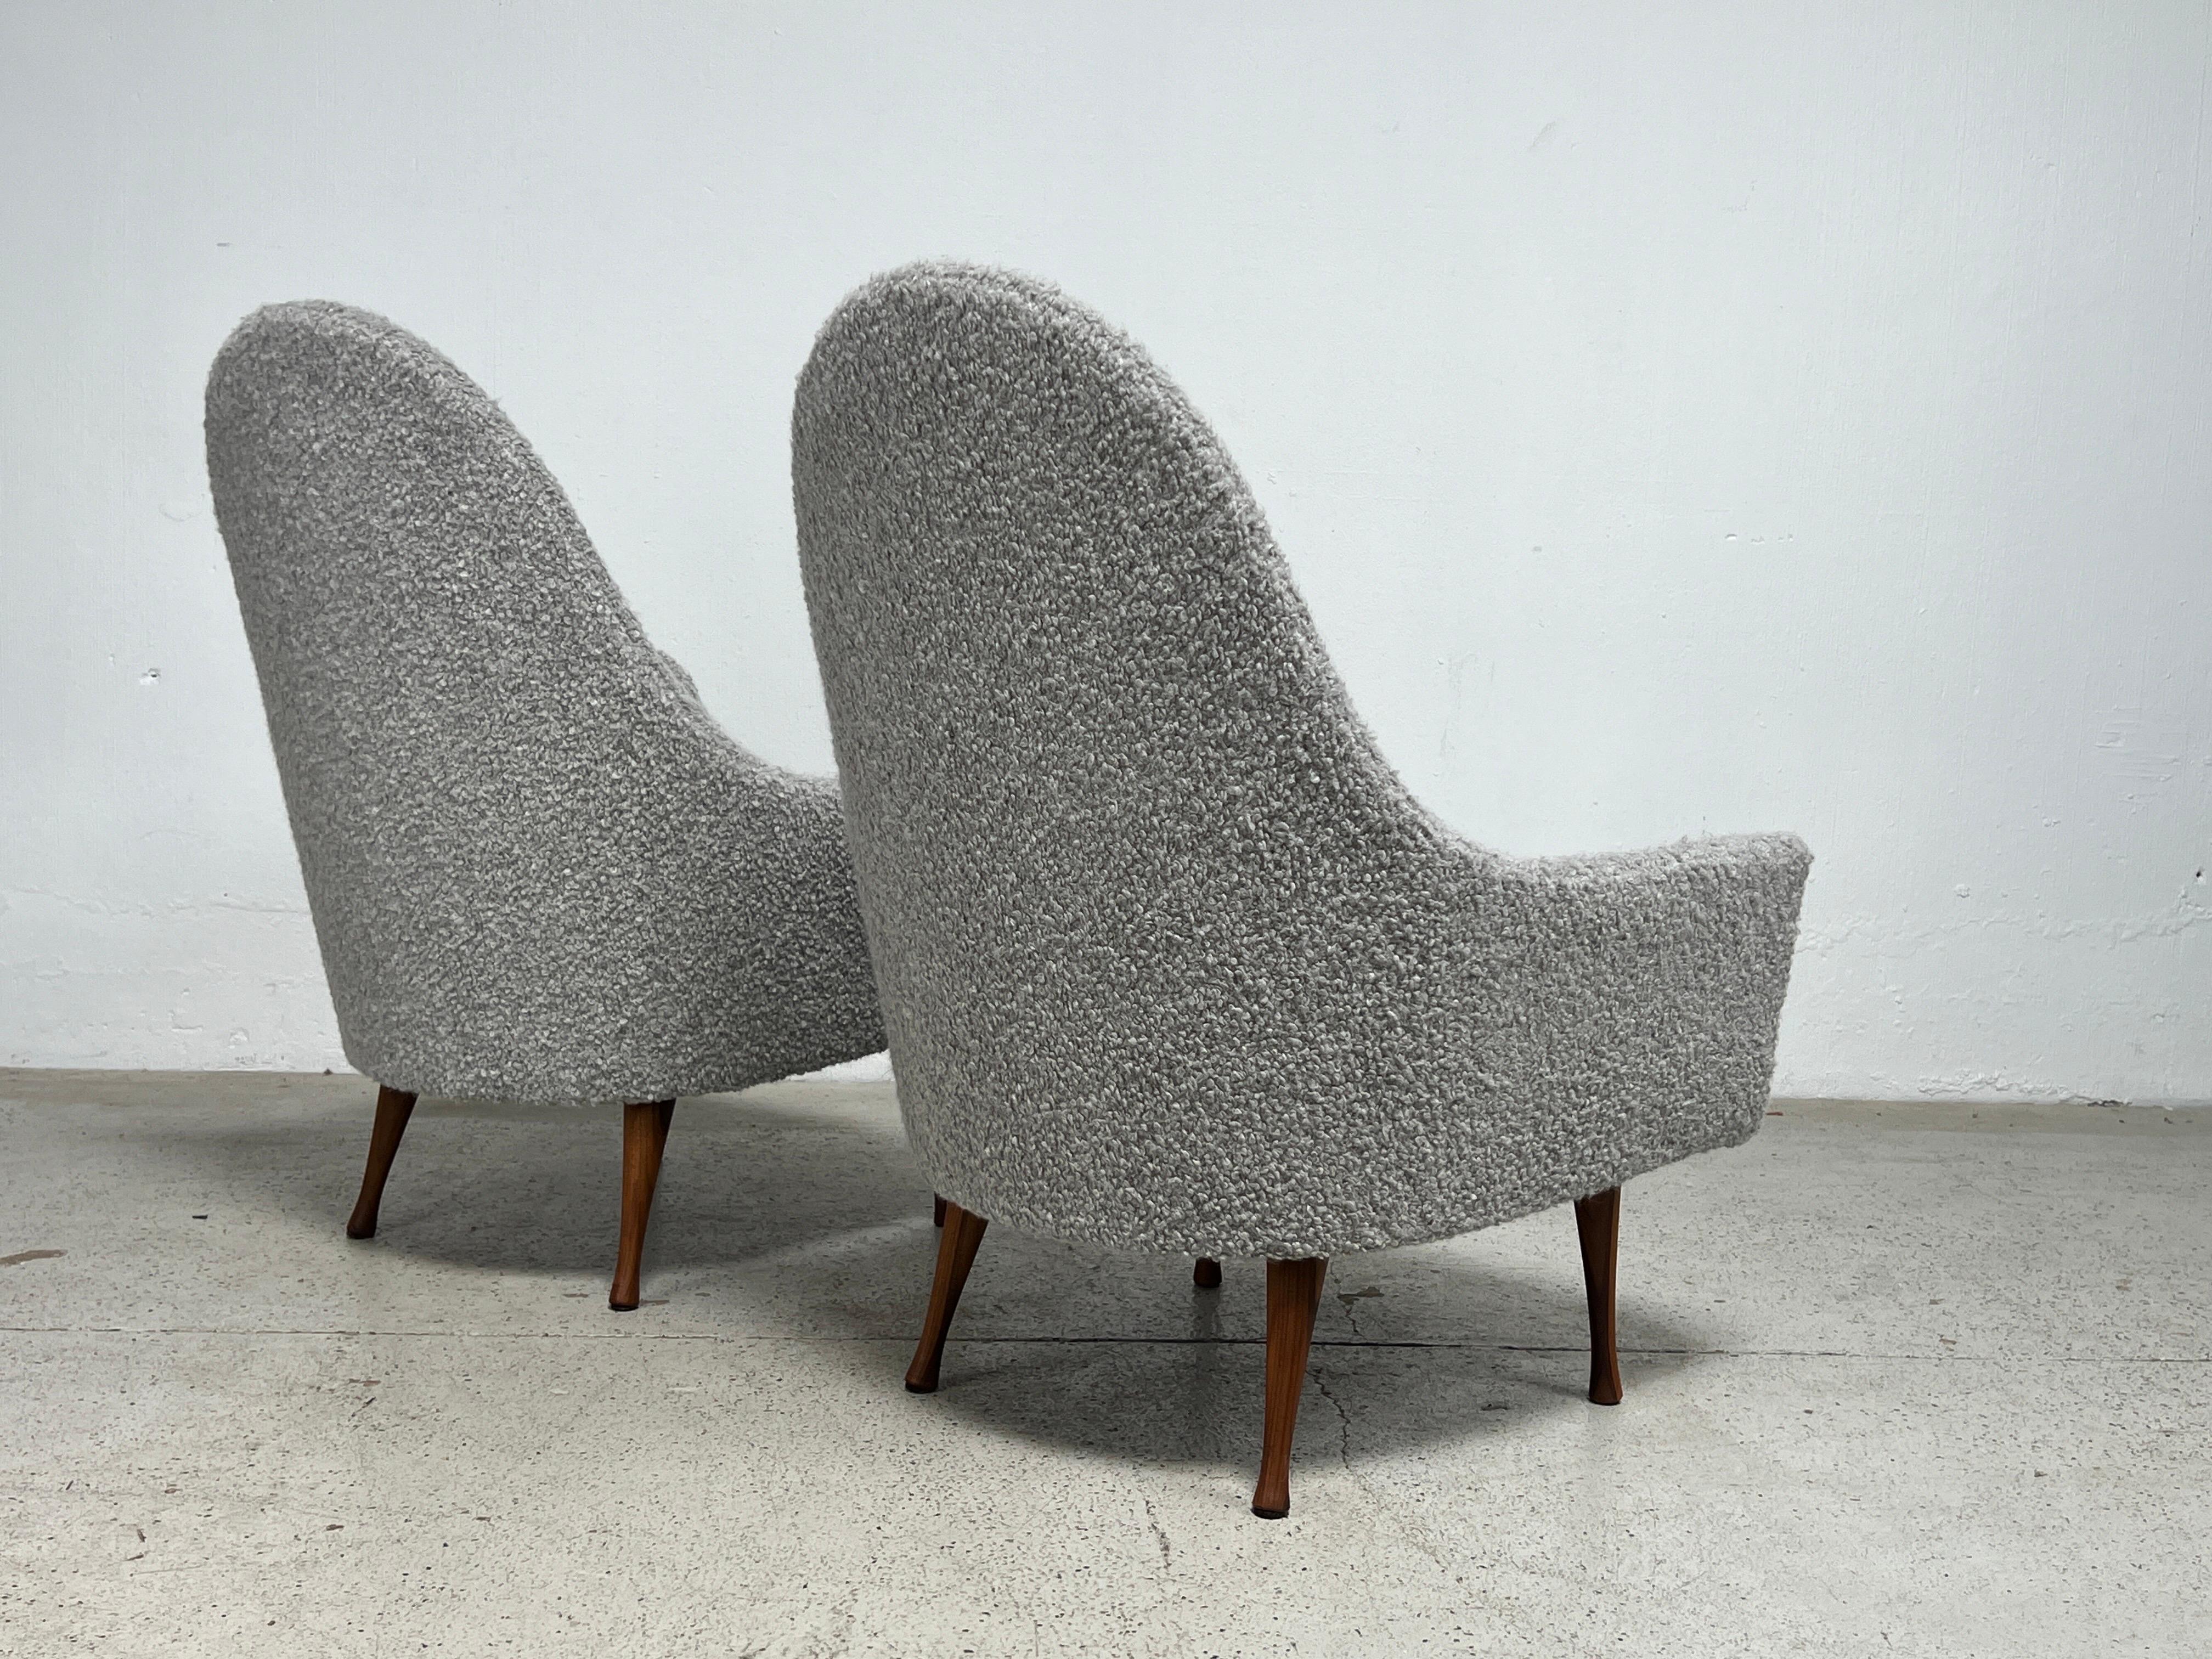 Pair of Lounge chairs by Paul McCobb for Widdicomb  For Sale 7